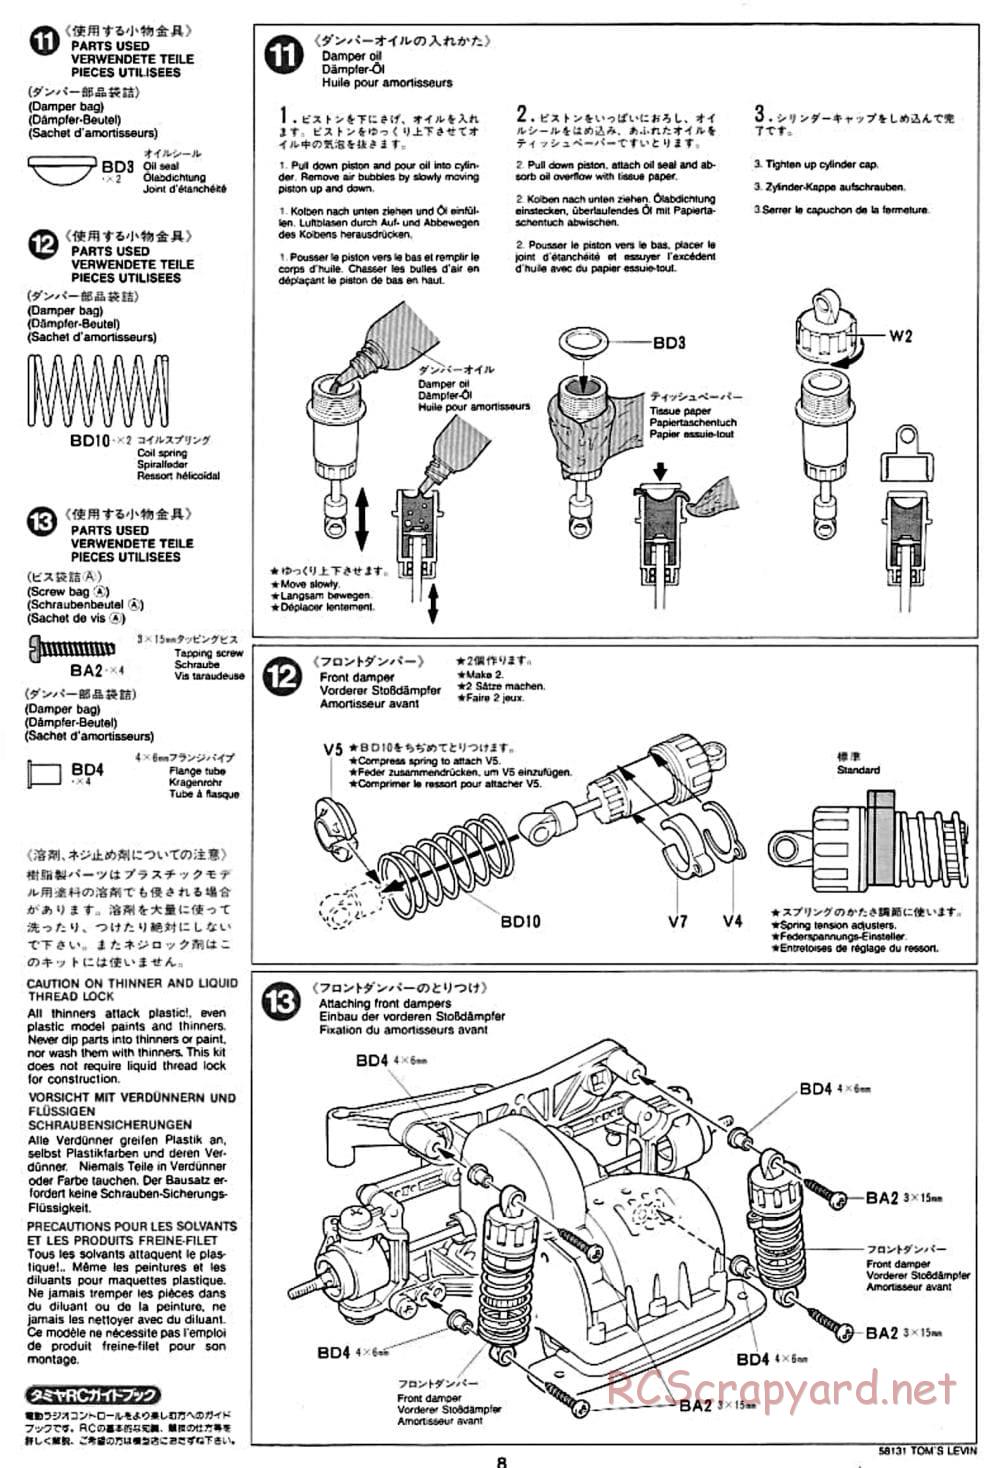 Tamiya - Toyota Tom's Levin - FF-01 Chassis - Manual - Page 8